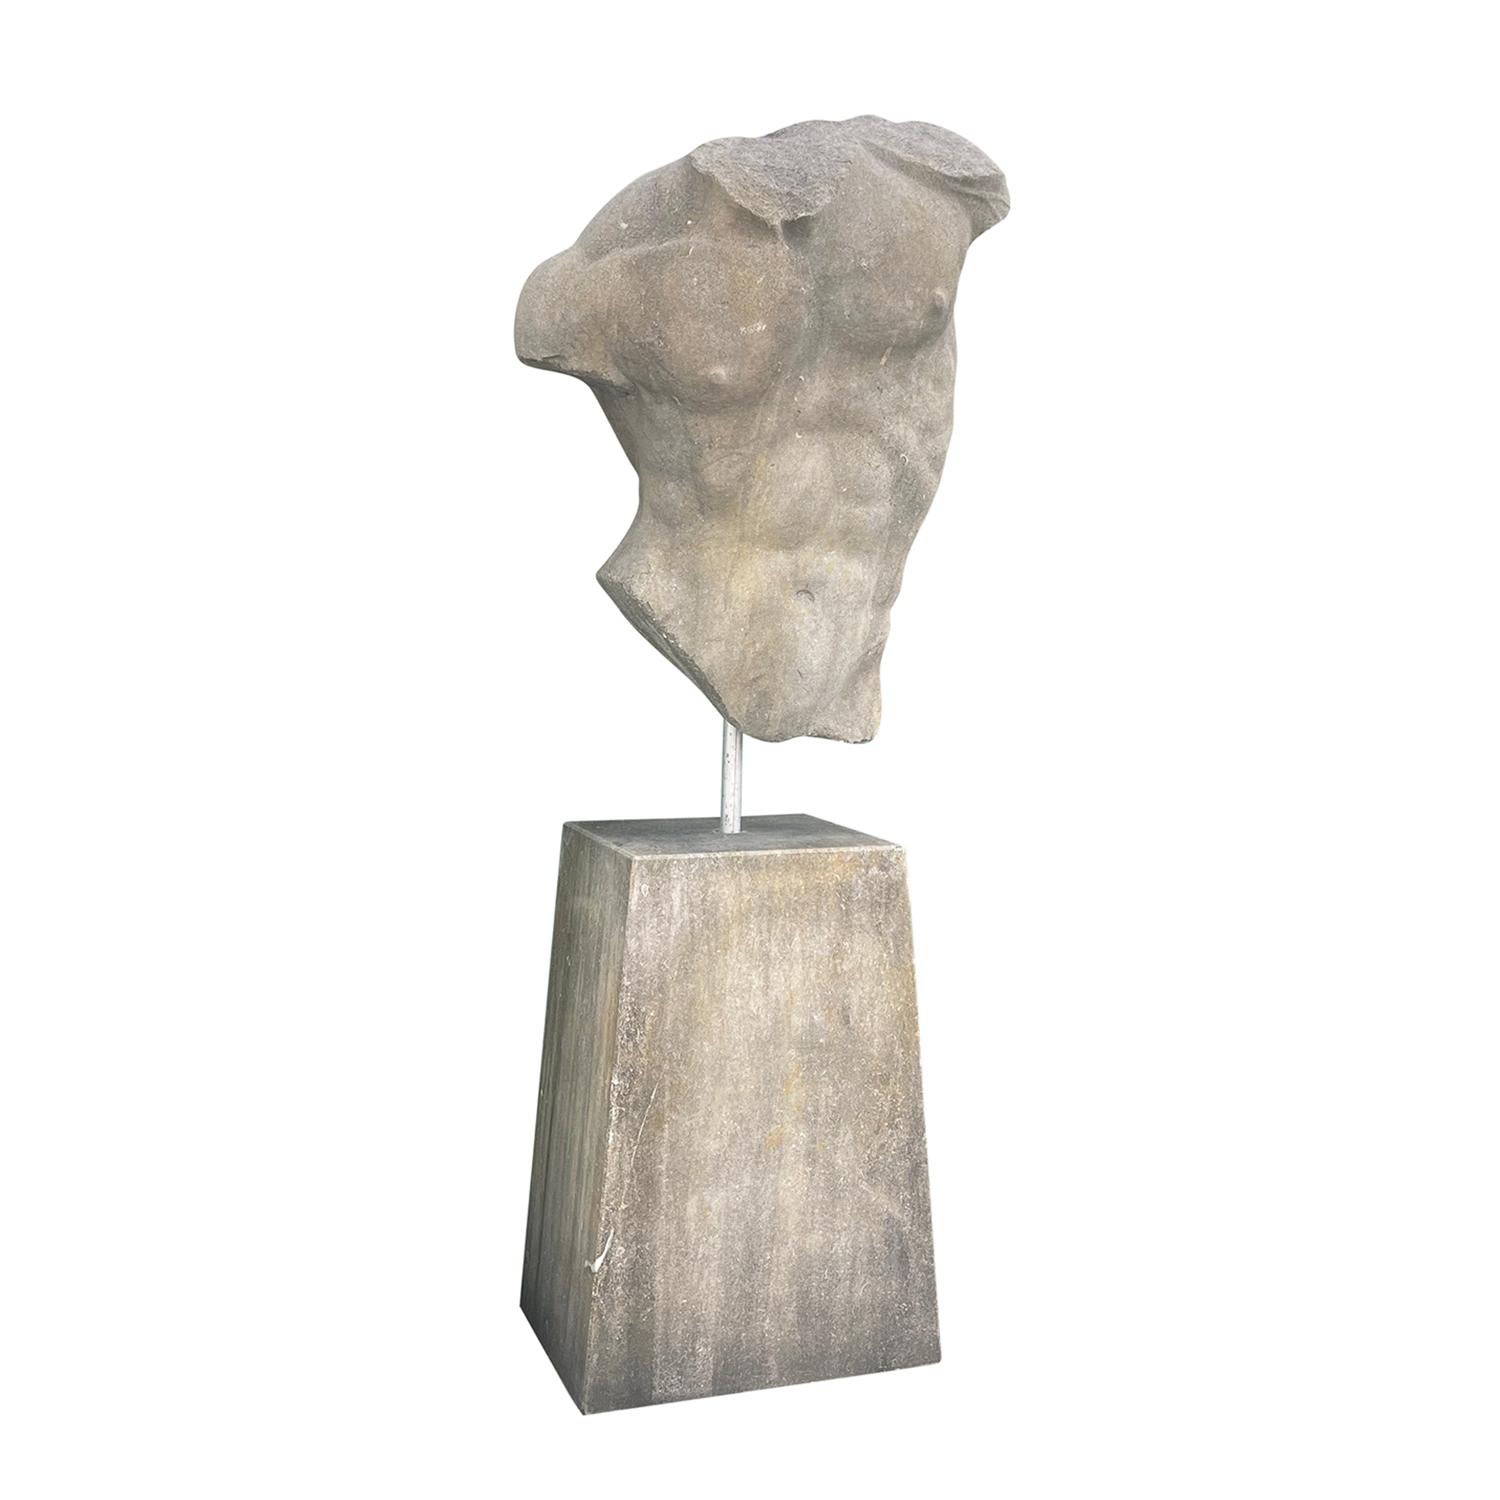 A tall limestone statue of a male torso carved in the Classical style. The details remind of the Italian Renaissance period. The large vintage Italian male torso sculpture is positioned on a trapezoid shaped plinth. Weather patina, wear consistent